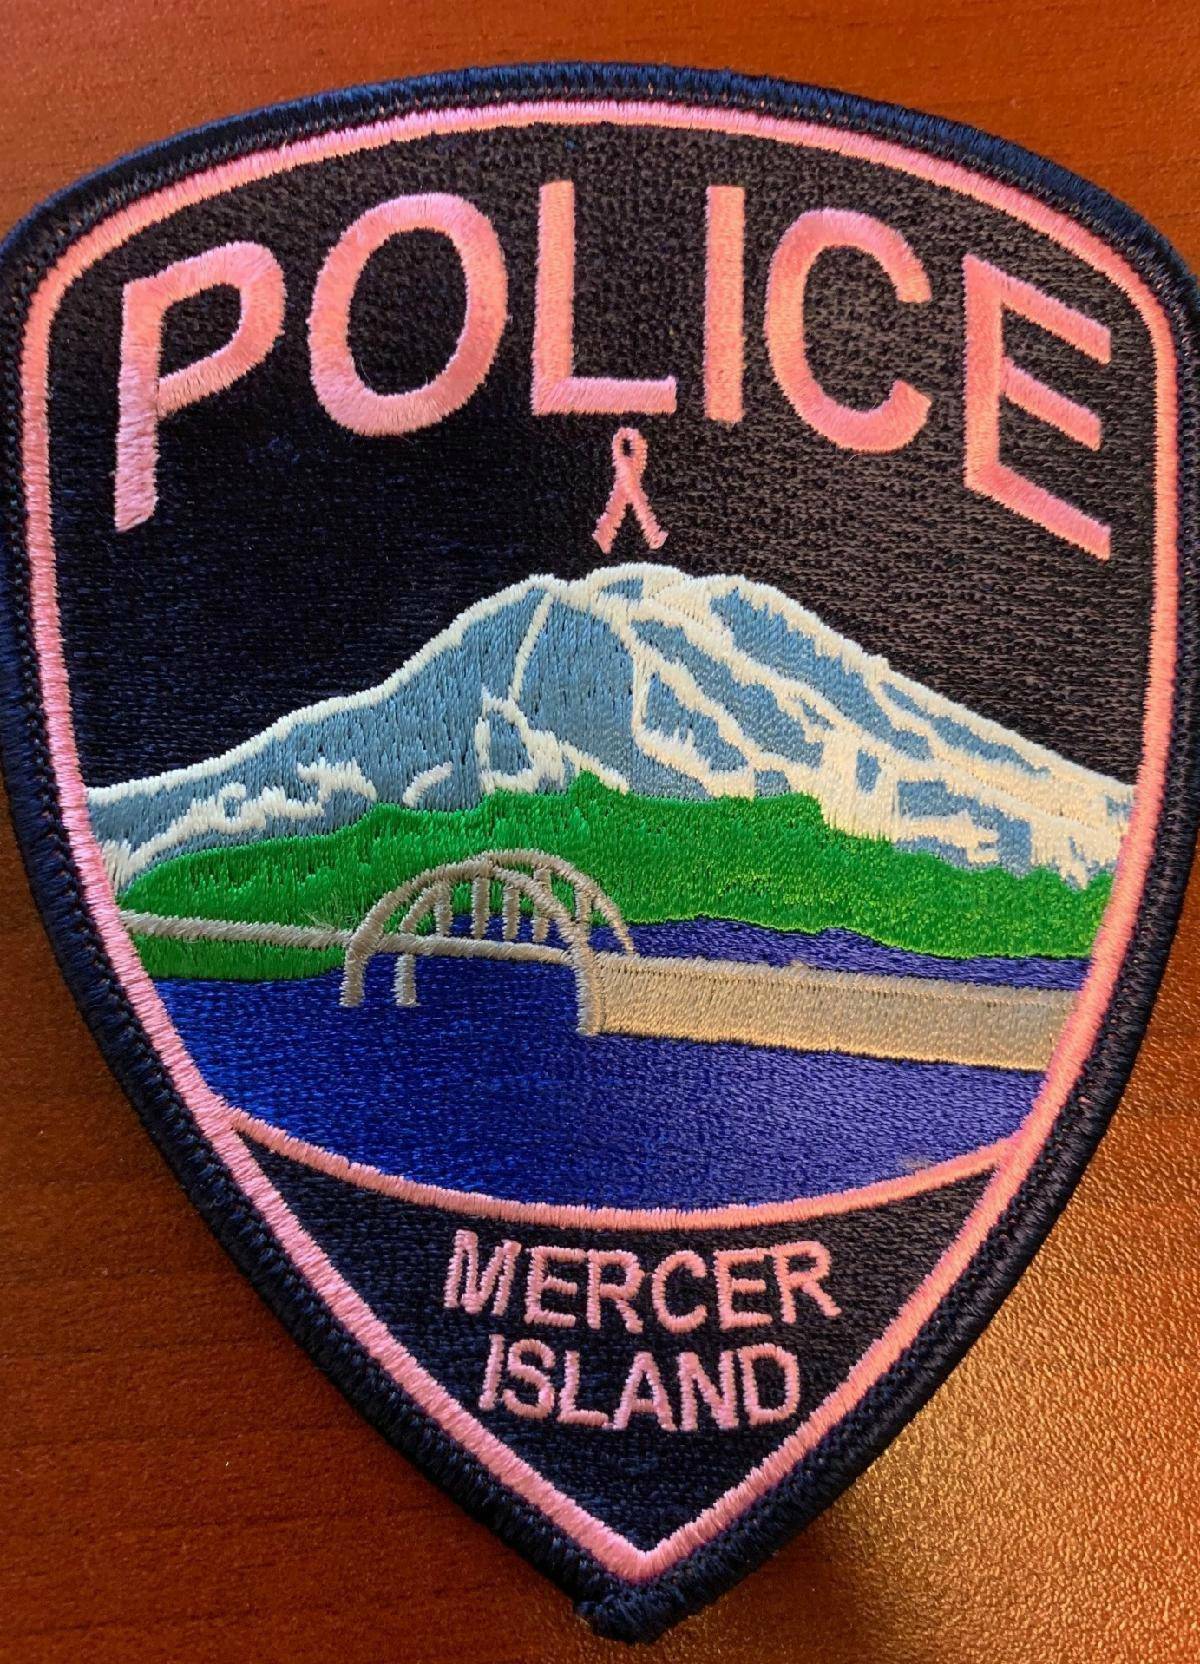 Mercer Island Police Department (MIPD) officers will be wearing special pink patches during Breast Cancer Awareness Month in October as MIPD joins other departments across the region in showing its support. Retired MIPD detective Pete Erickson designed the patches, which are available for $10 with proceeds going to the Susan G. Komen Breast Cancer Foundation. For information, email pterickson@hotmail.com.